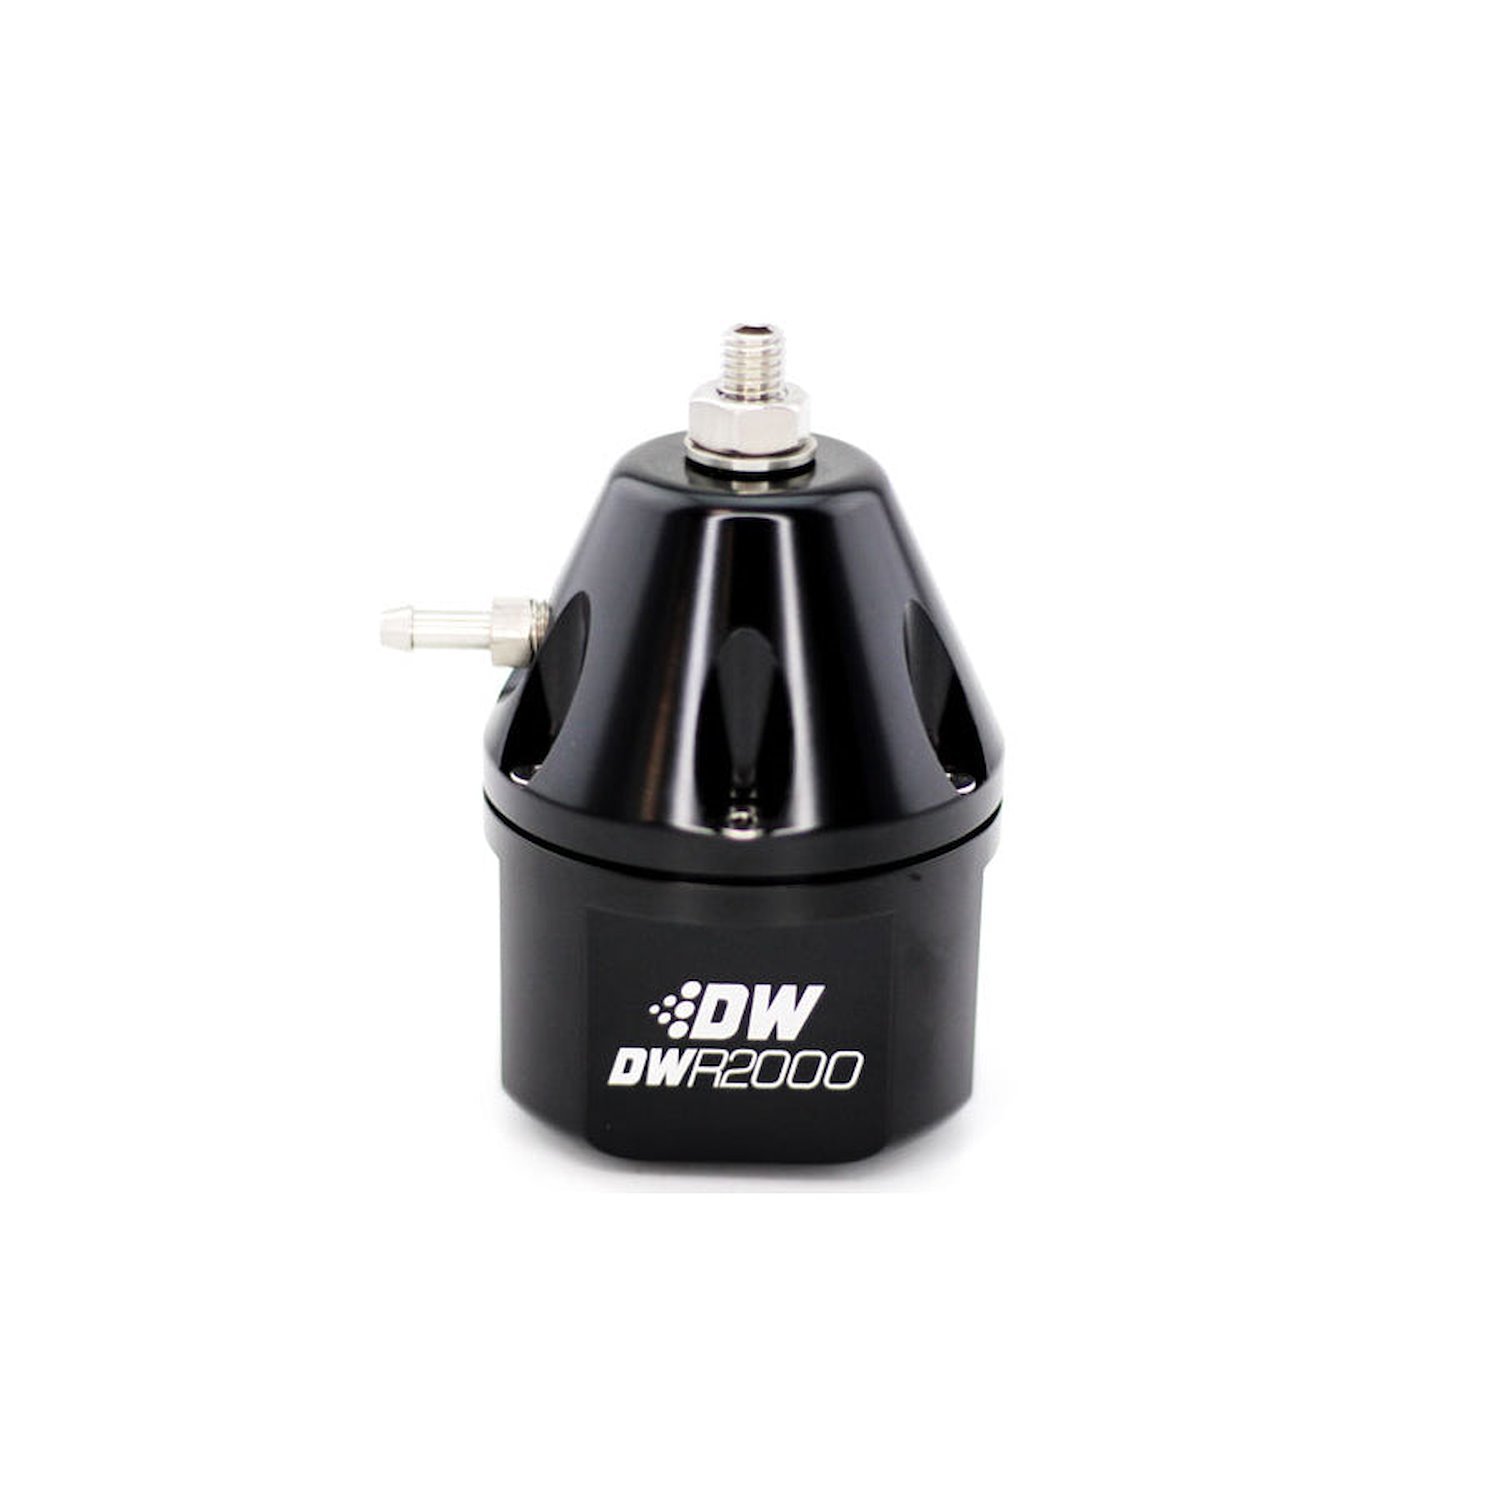 62000FRB DWR2000 adjustable fuel pressure regulator anodized black. Dual -10AN inlet and -8AN outlet. Universal fitment